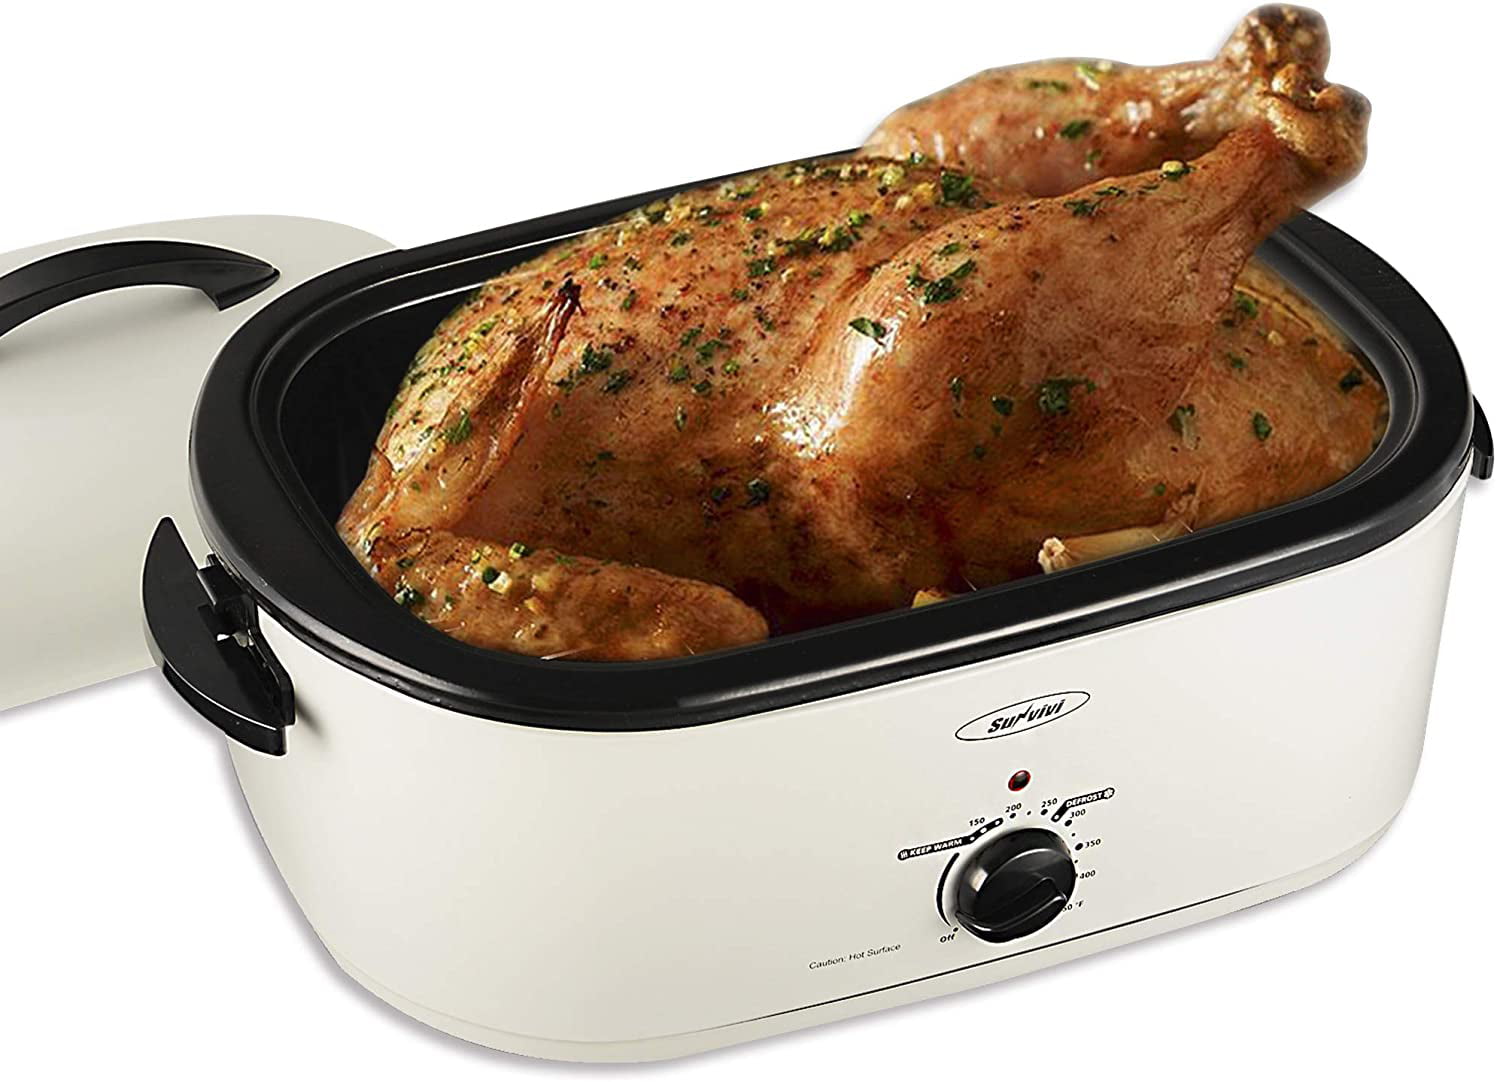 20 QT, Silver Large Electric Roaster Oven with Self-Basting Lid Turkey Roaster Oven with Removable Insert Pot Full-range Temperature Control and Cool-Touch Handles 